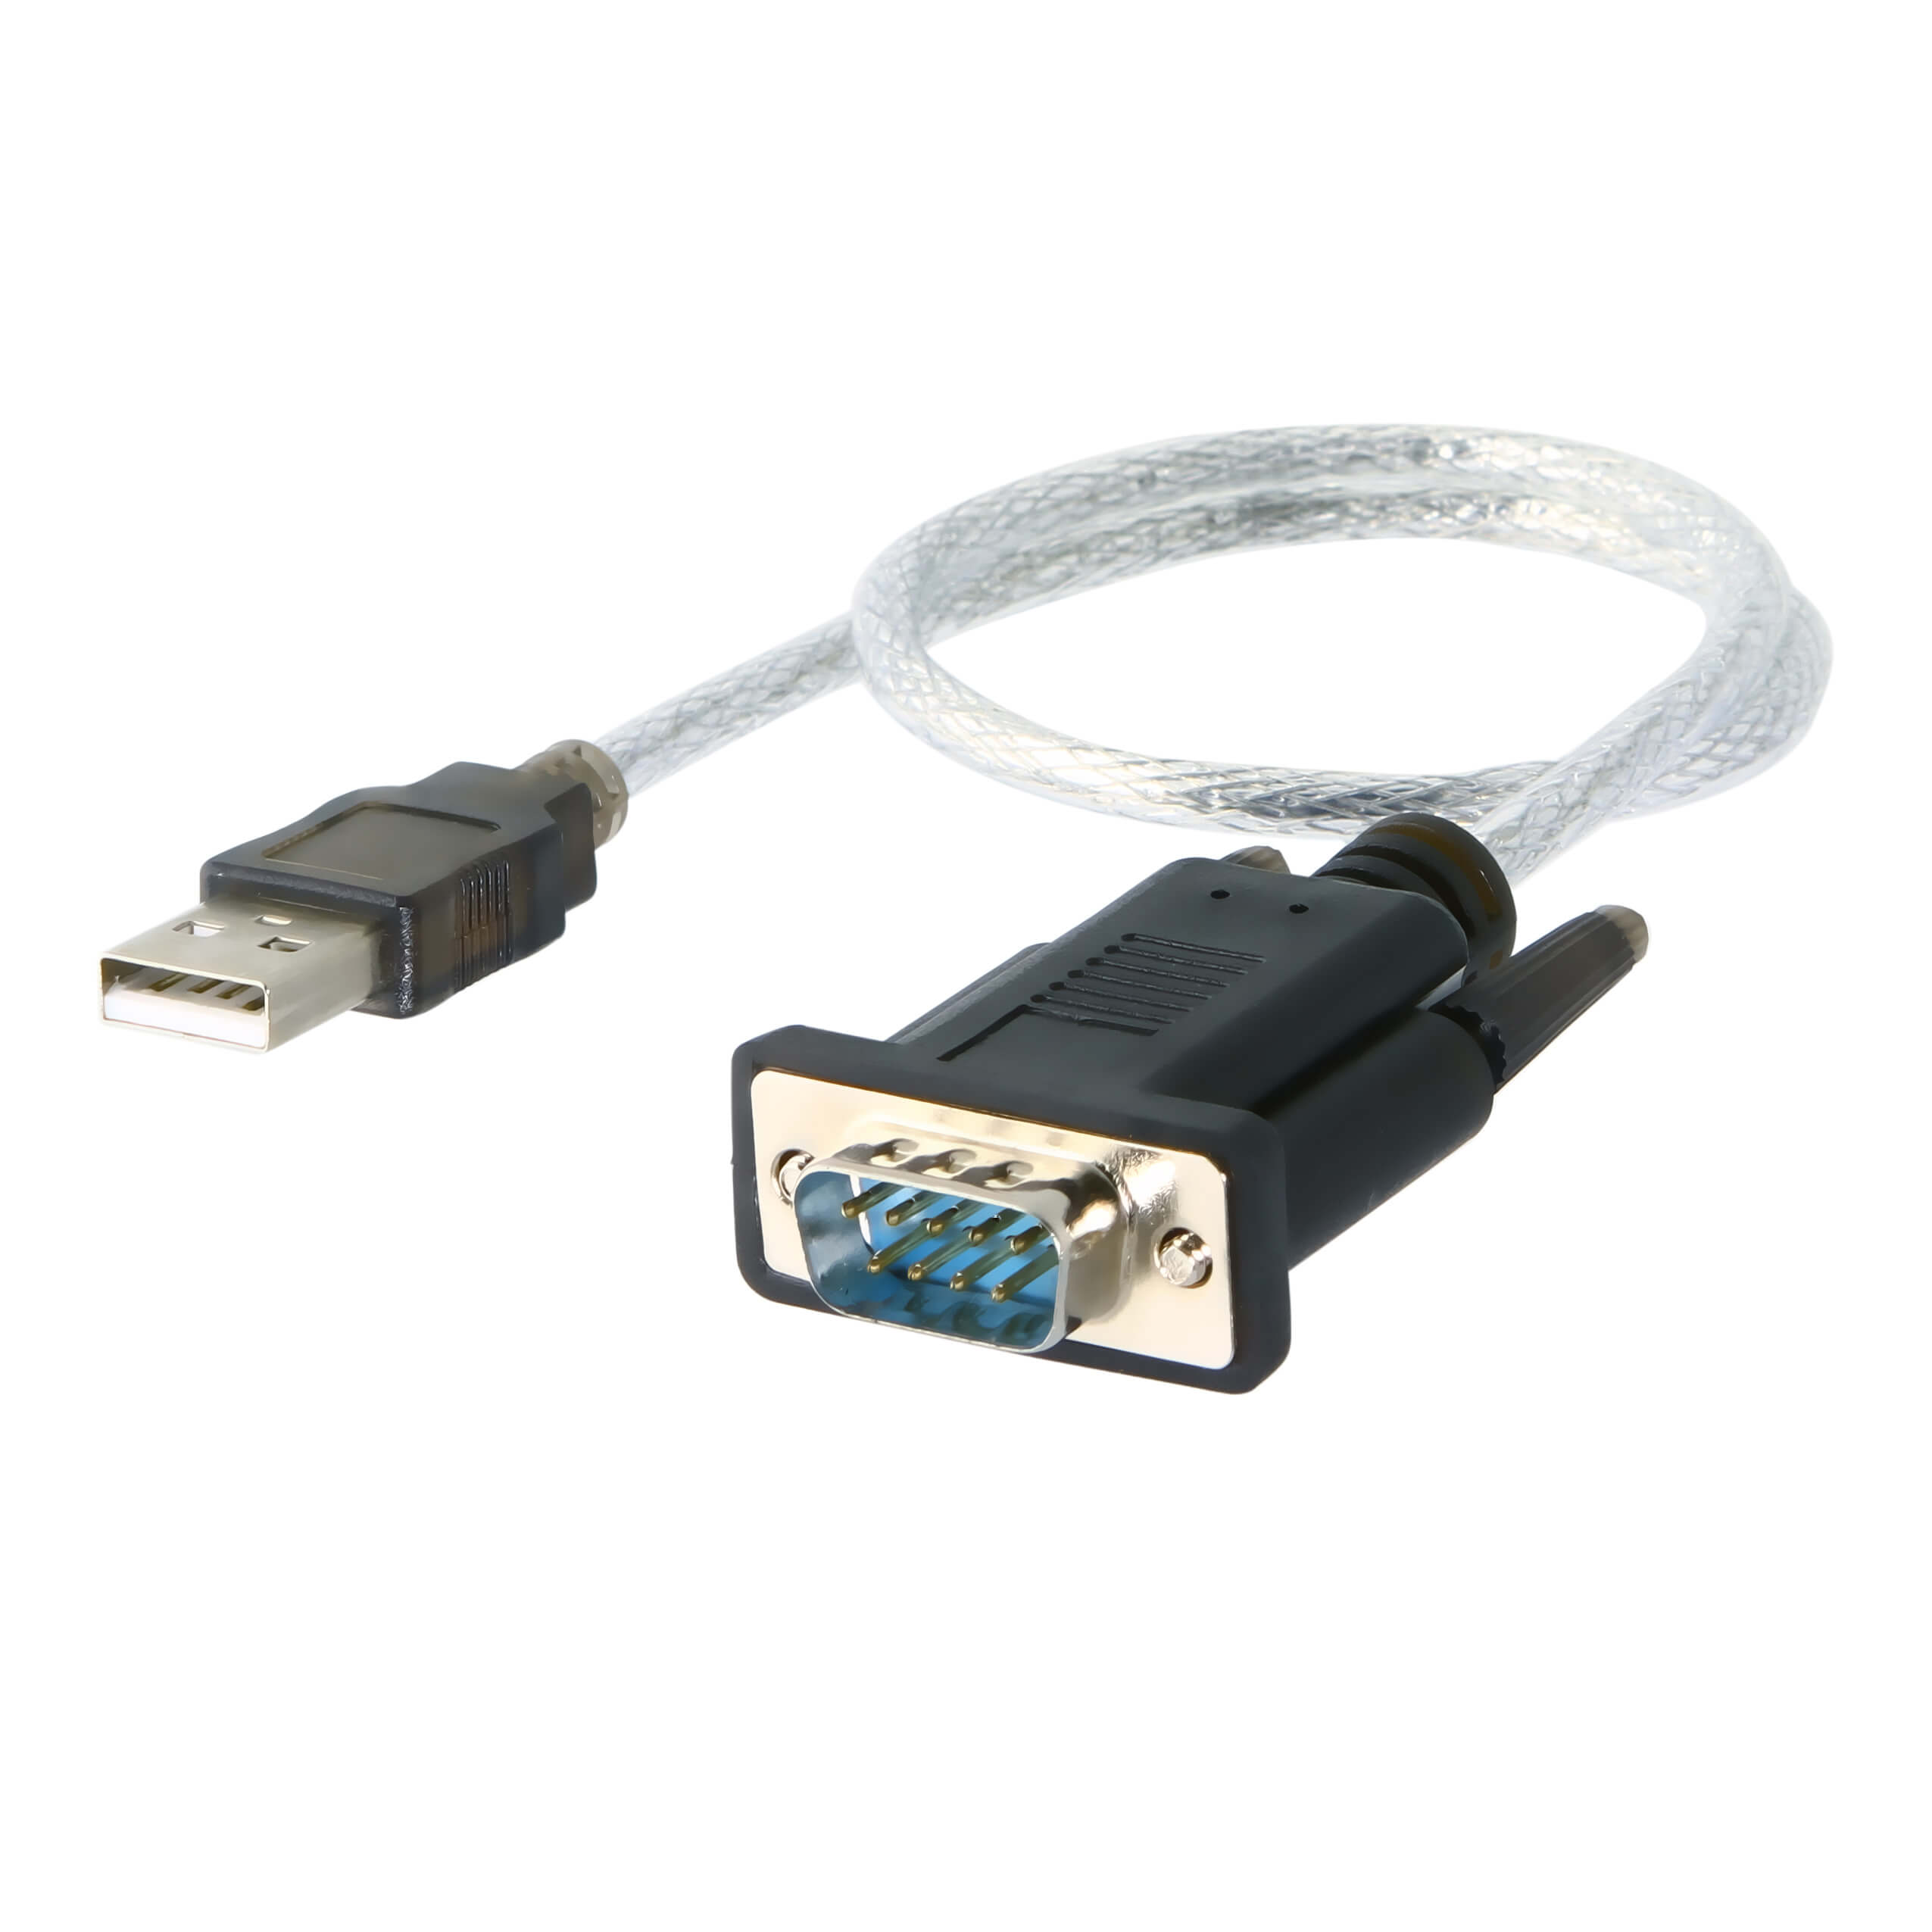 usb to rs232 driver download